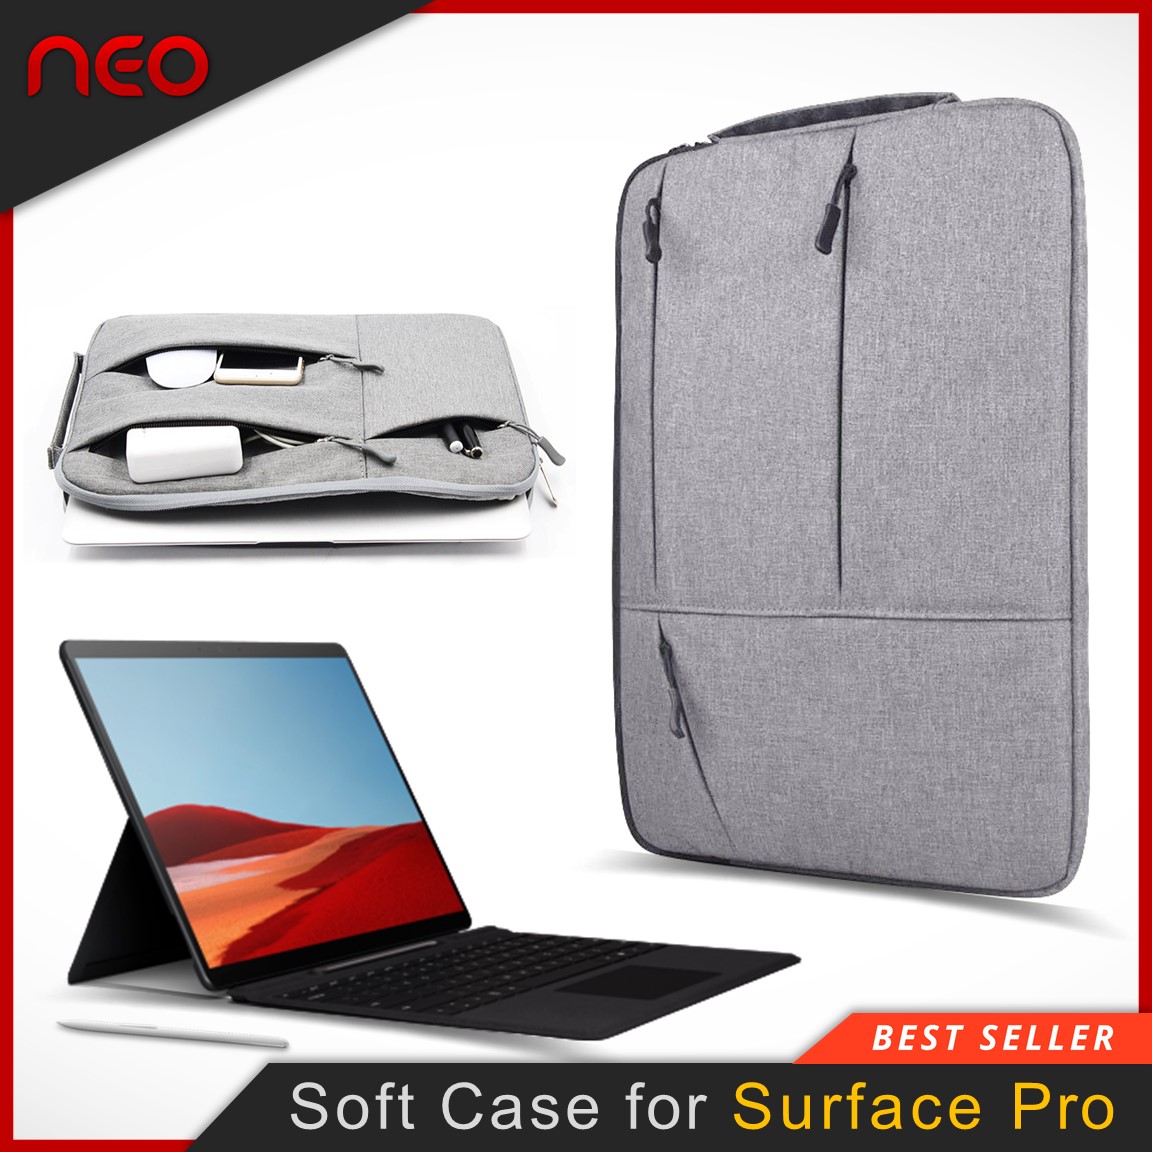 NEO เคสSurface Pro 7 กระเป๋าSurface Pro 4 / 5 / 6 / ซองใส่Surface เคสกันรอย กันกระแทก Briefcase for Microsoft Surface Pro 12.3 inch Shockproof Sleeve Case for Surface Pro